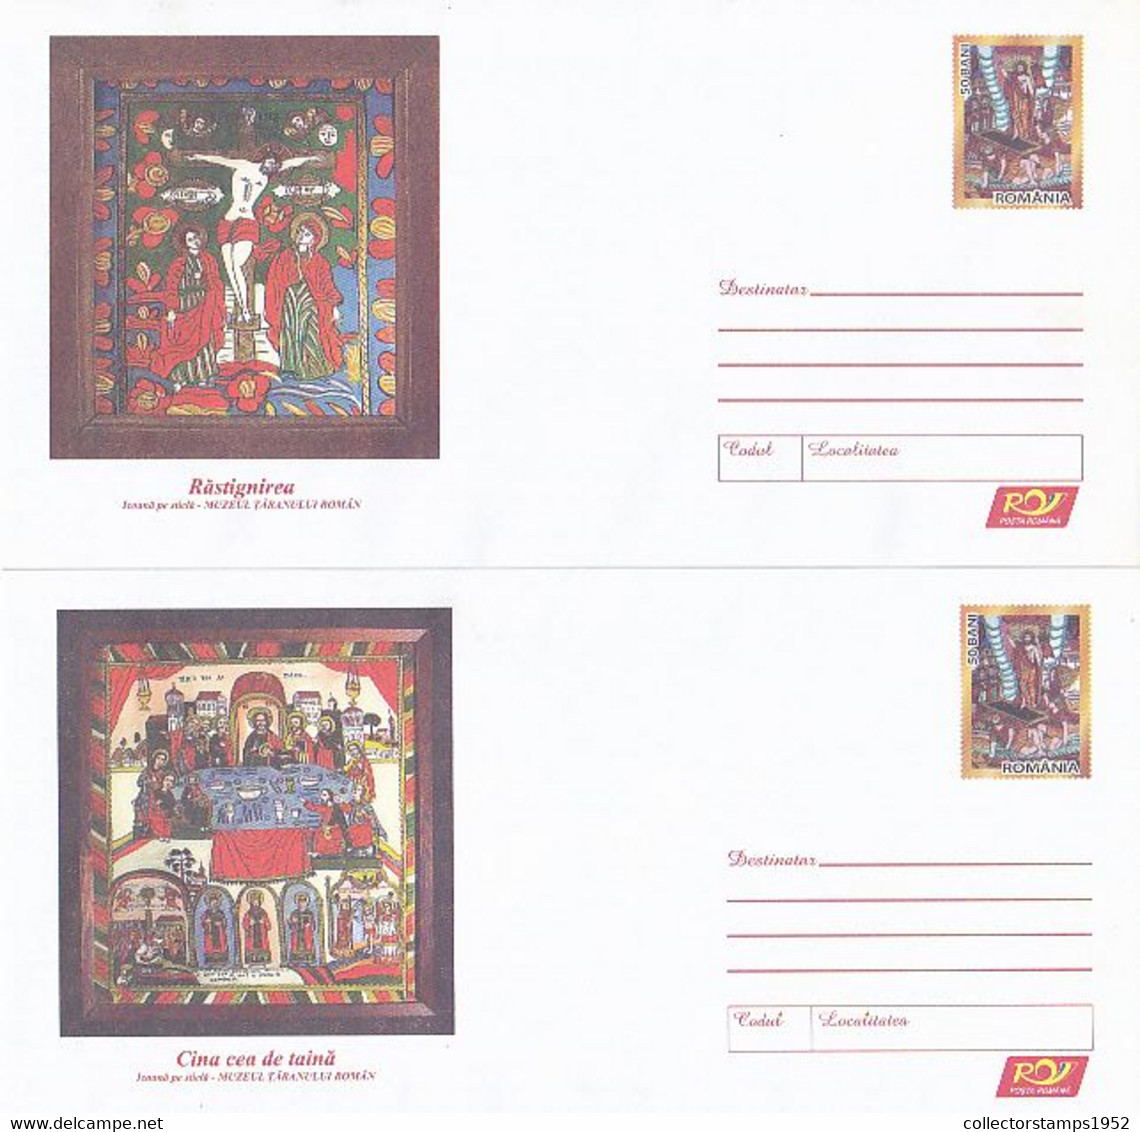 9030FM- JESUS' CRUCIFIXION, LAST SUPPER ICONS, PAINTINGS, RELIGION, COVER STATIONERY, 2X, 2006, ROMANIA - Tableaux